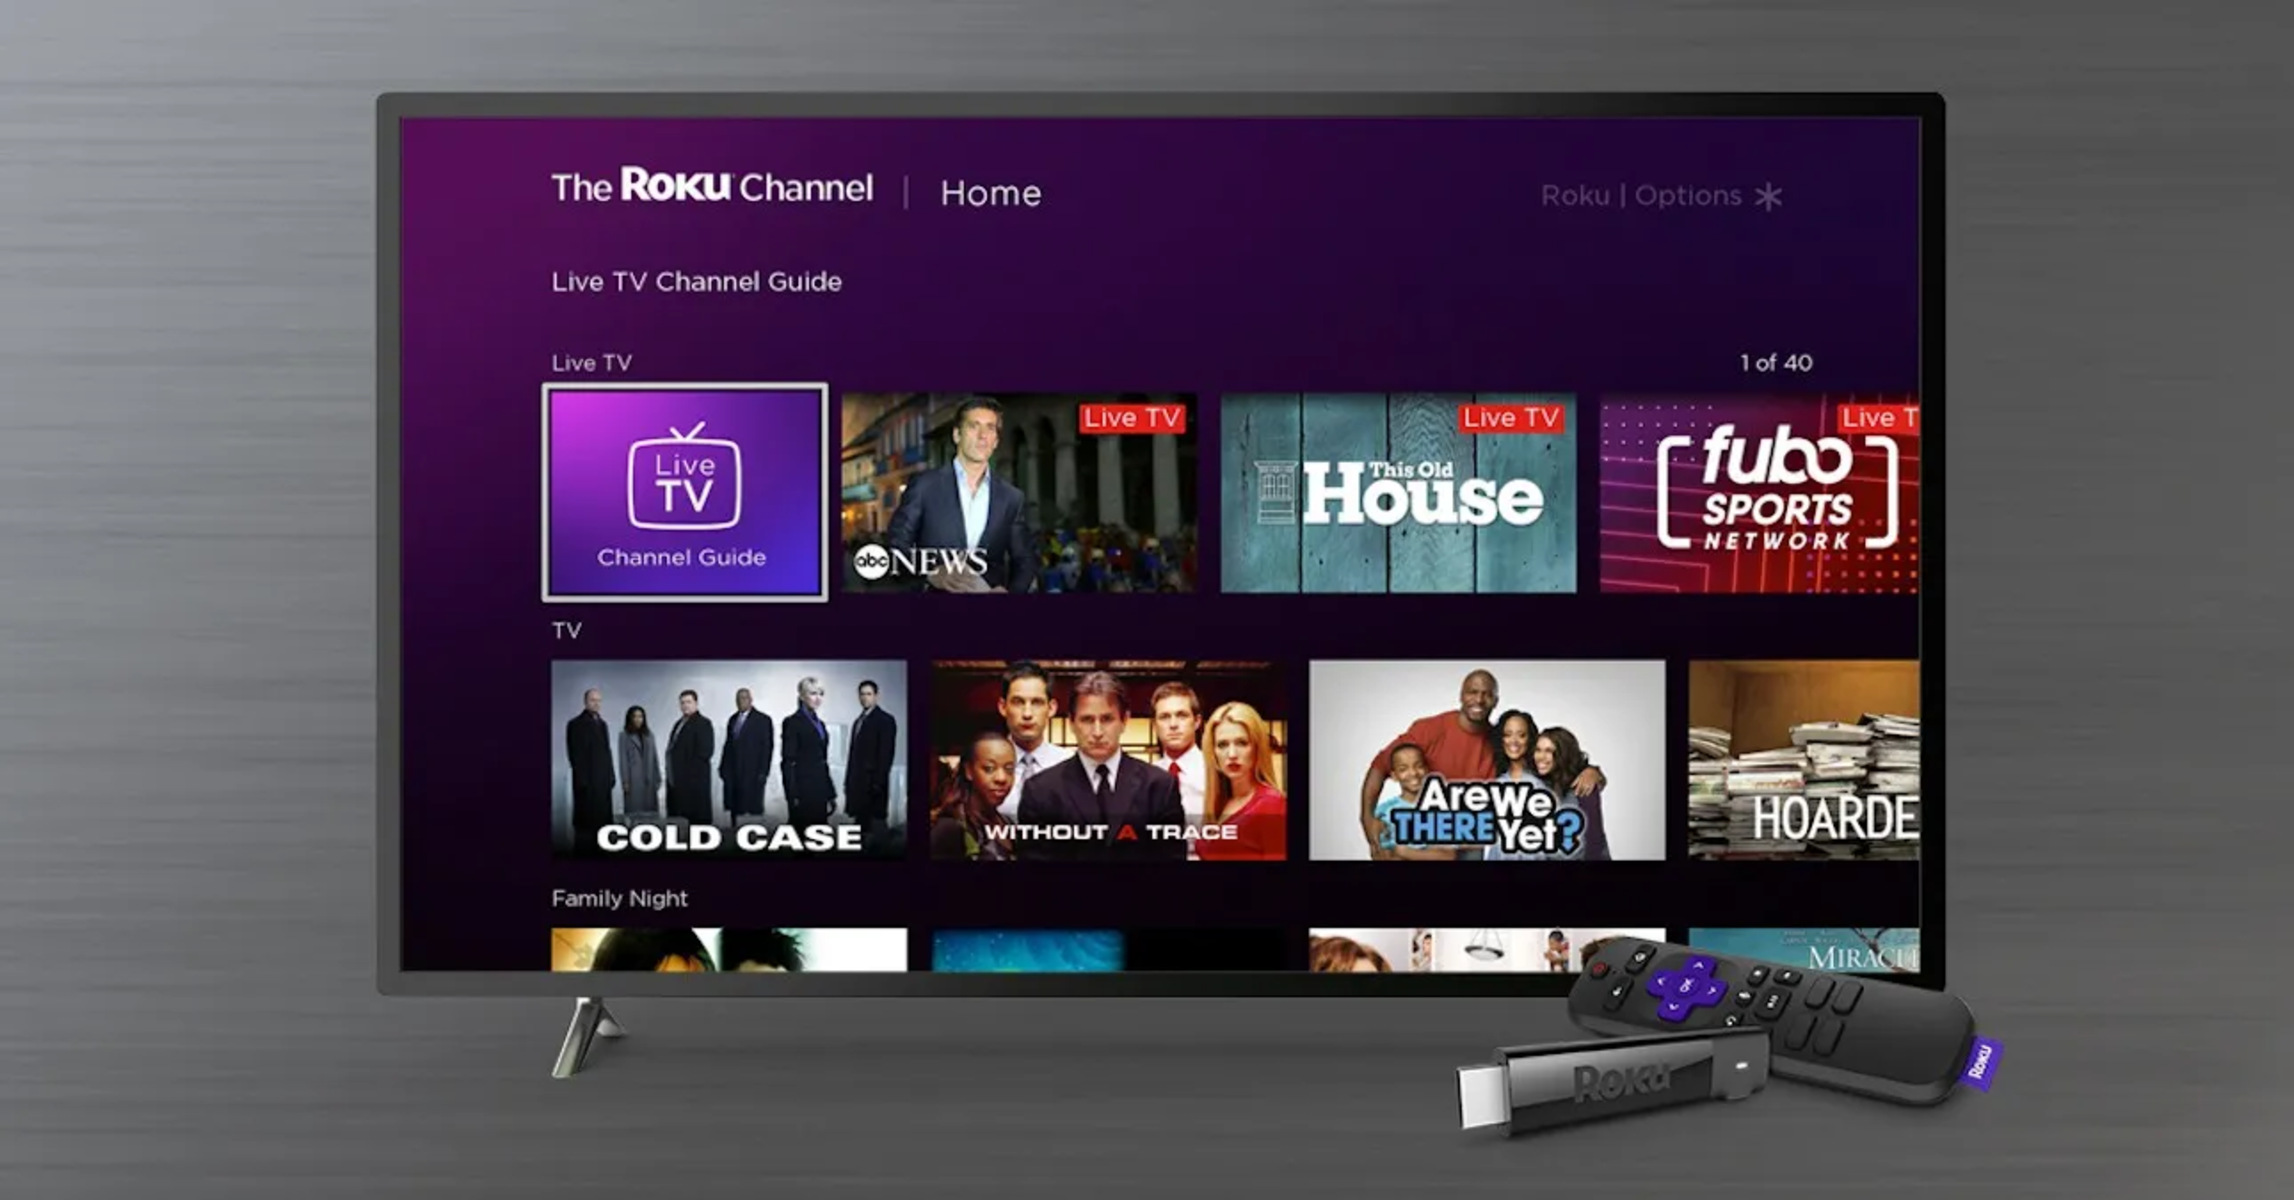 How To Change HDMI On Roku